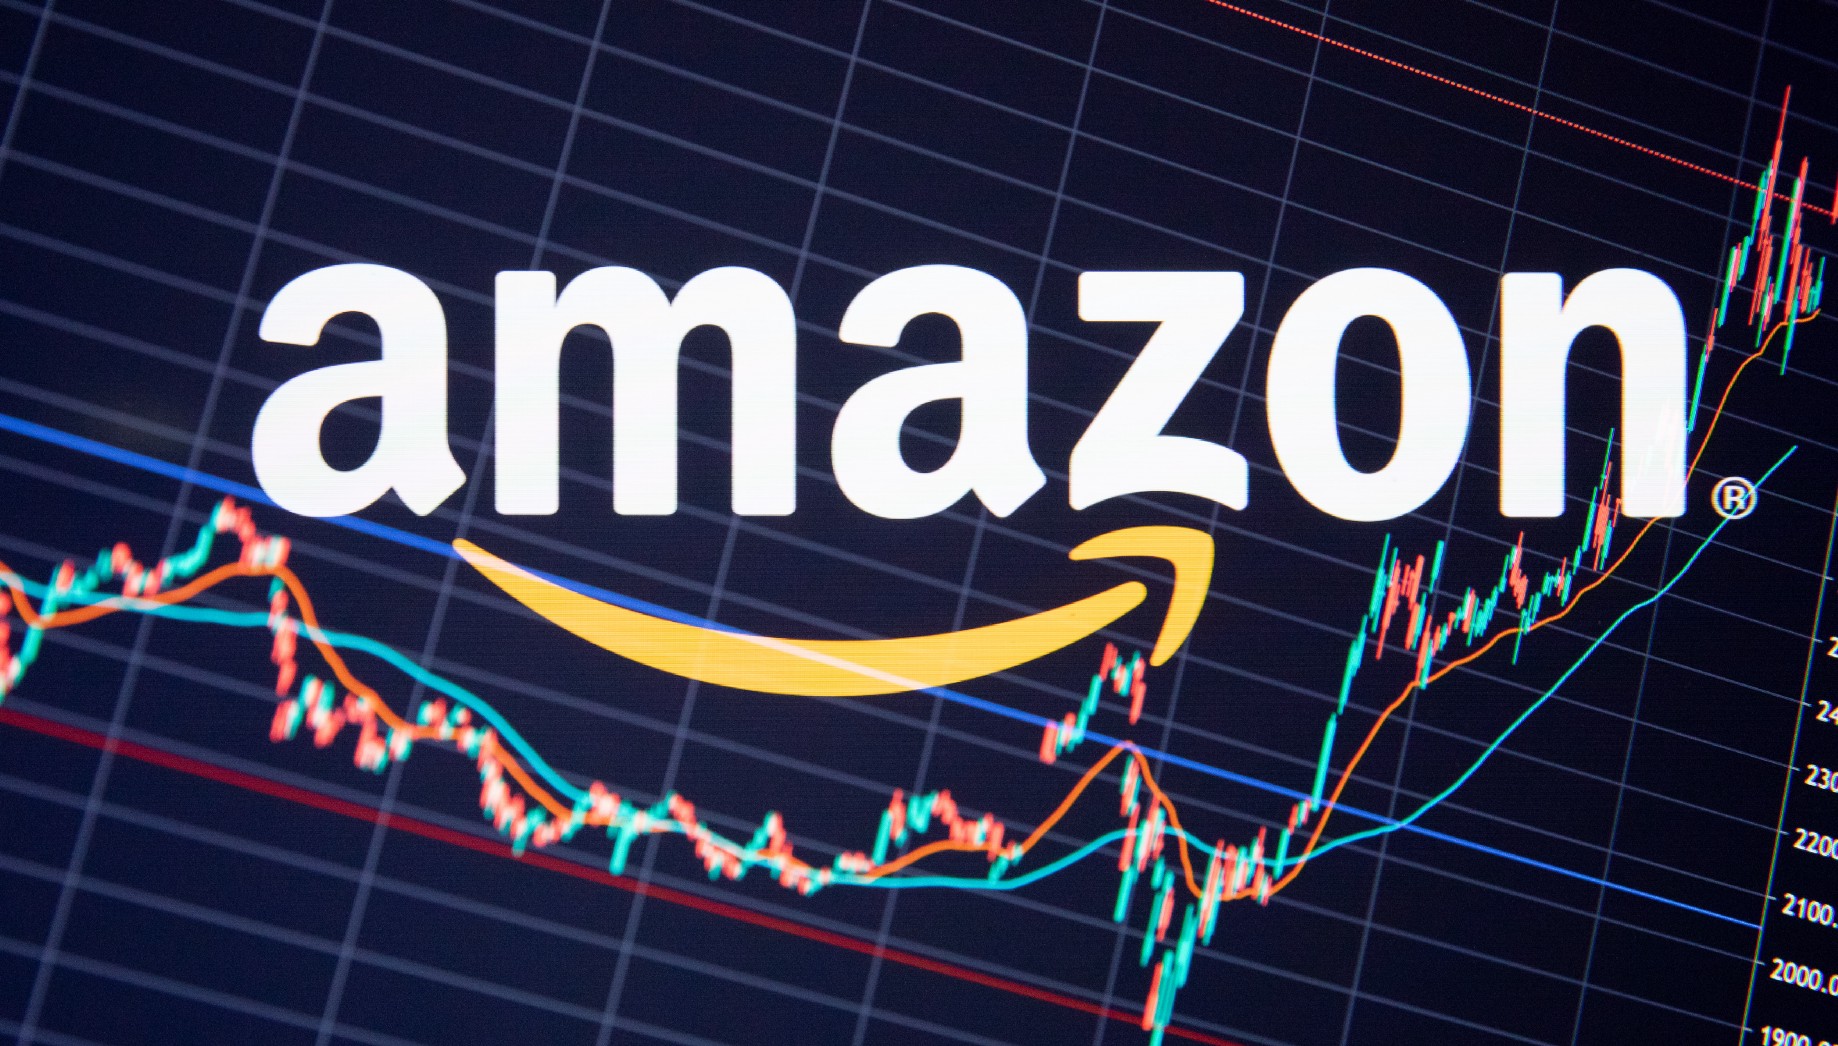 Amazon stock price rose following their Q4 earnings report